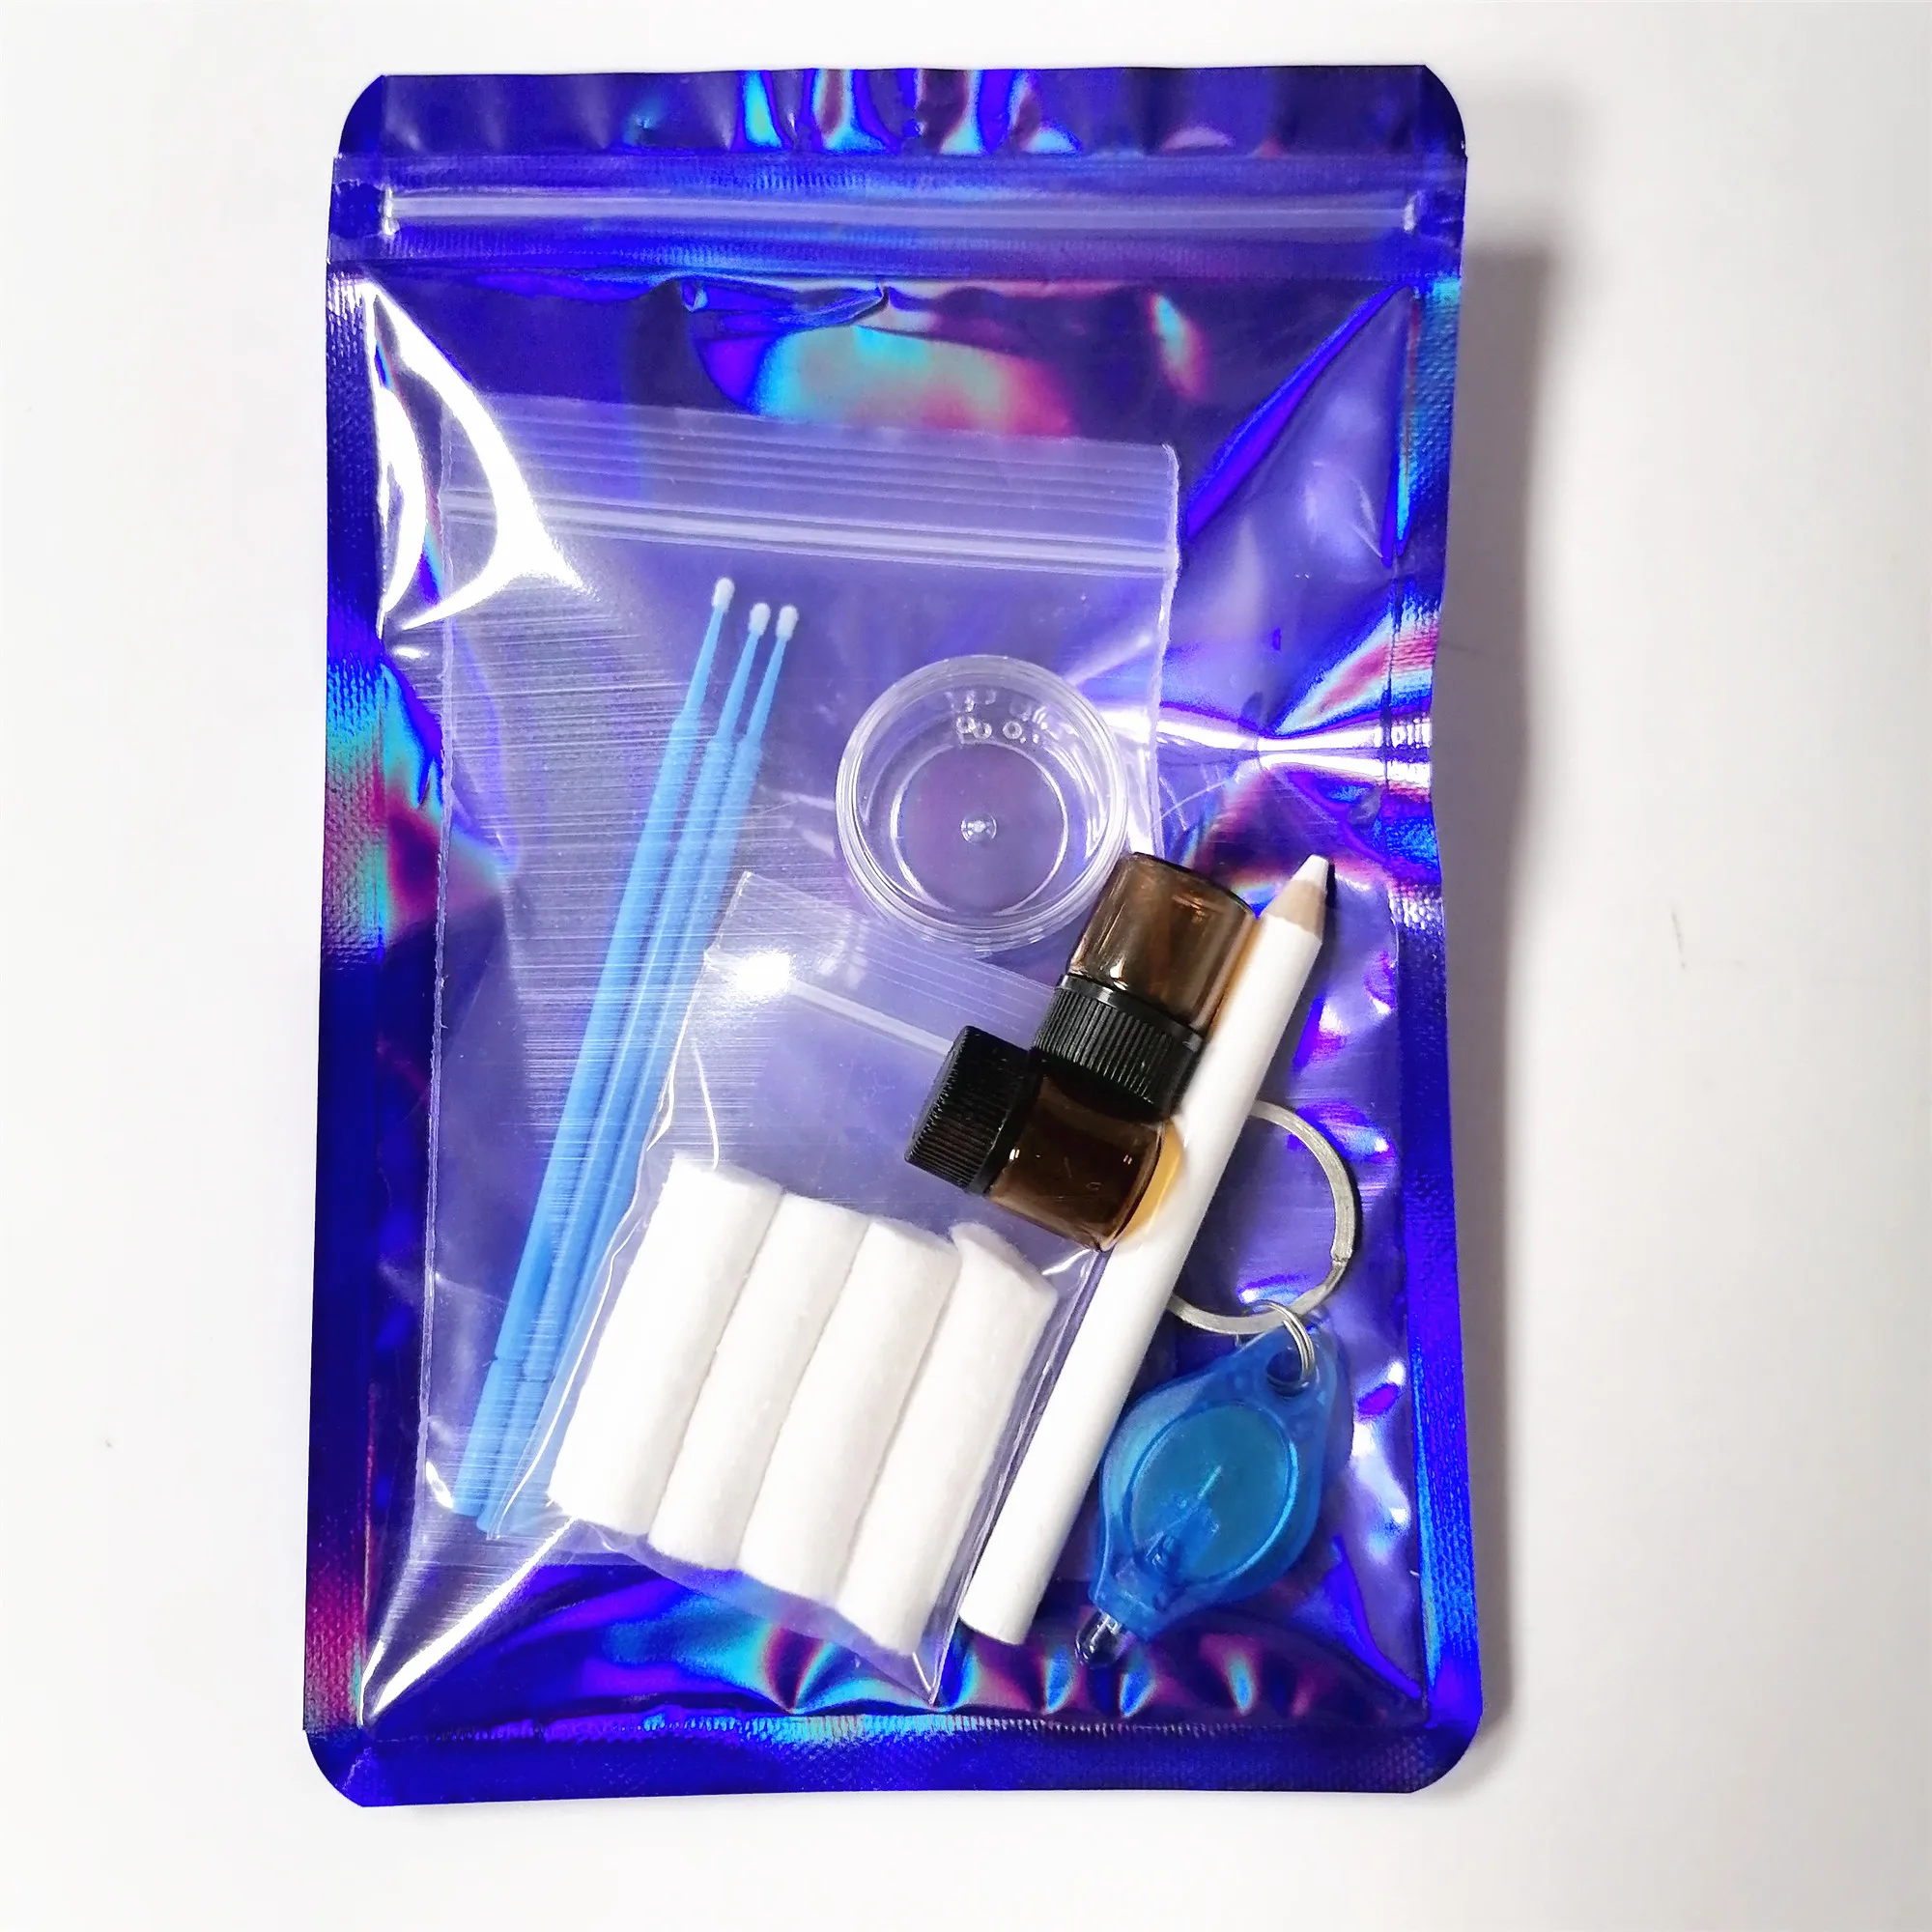 Tooth Gem Kit, Diy Tooth Gem Kit With Curing Light And Glue, Tooth